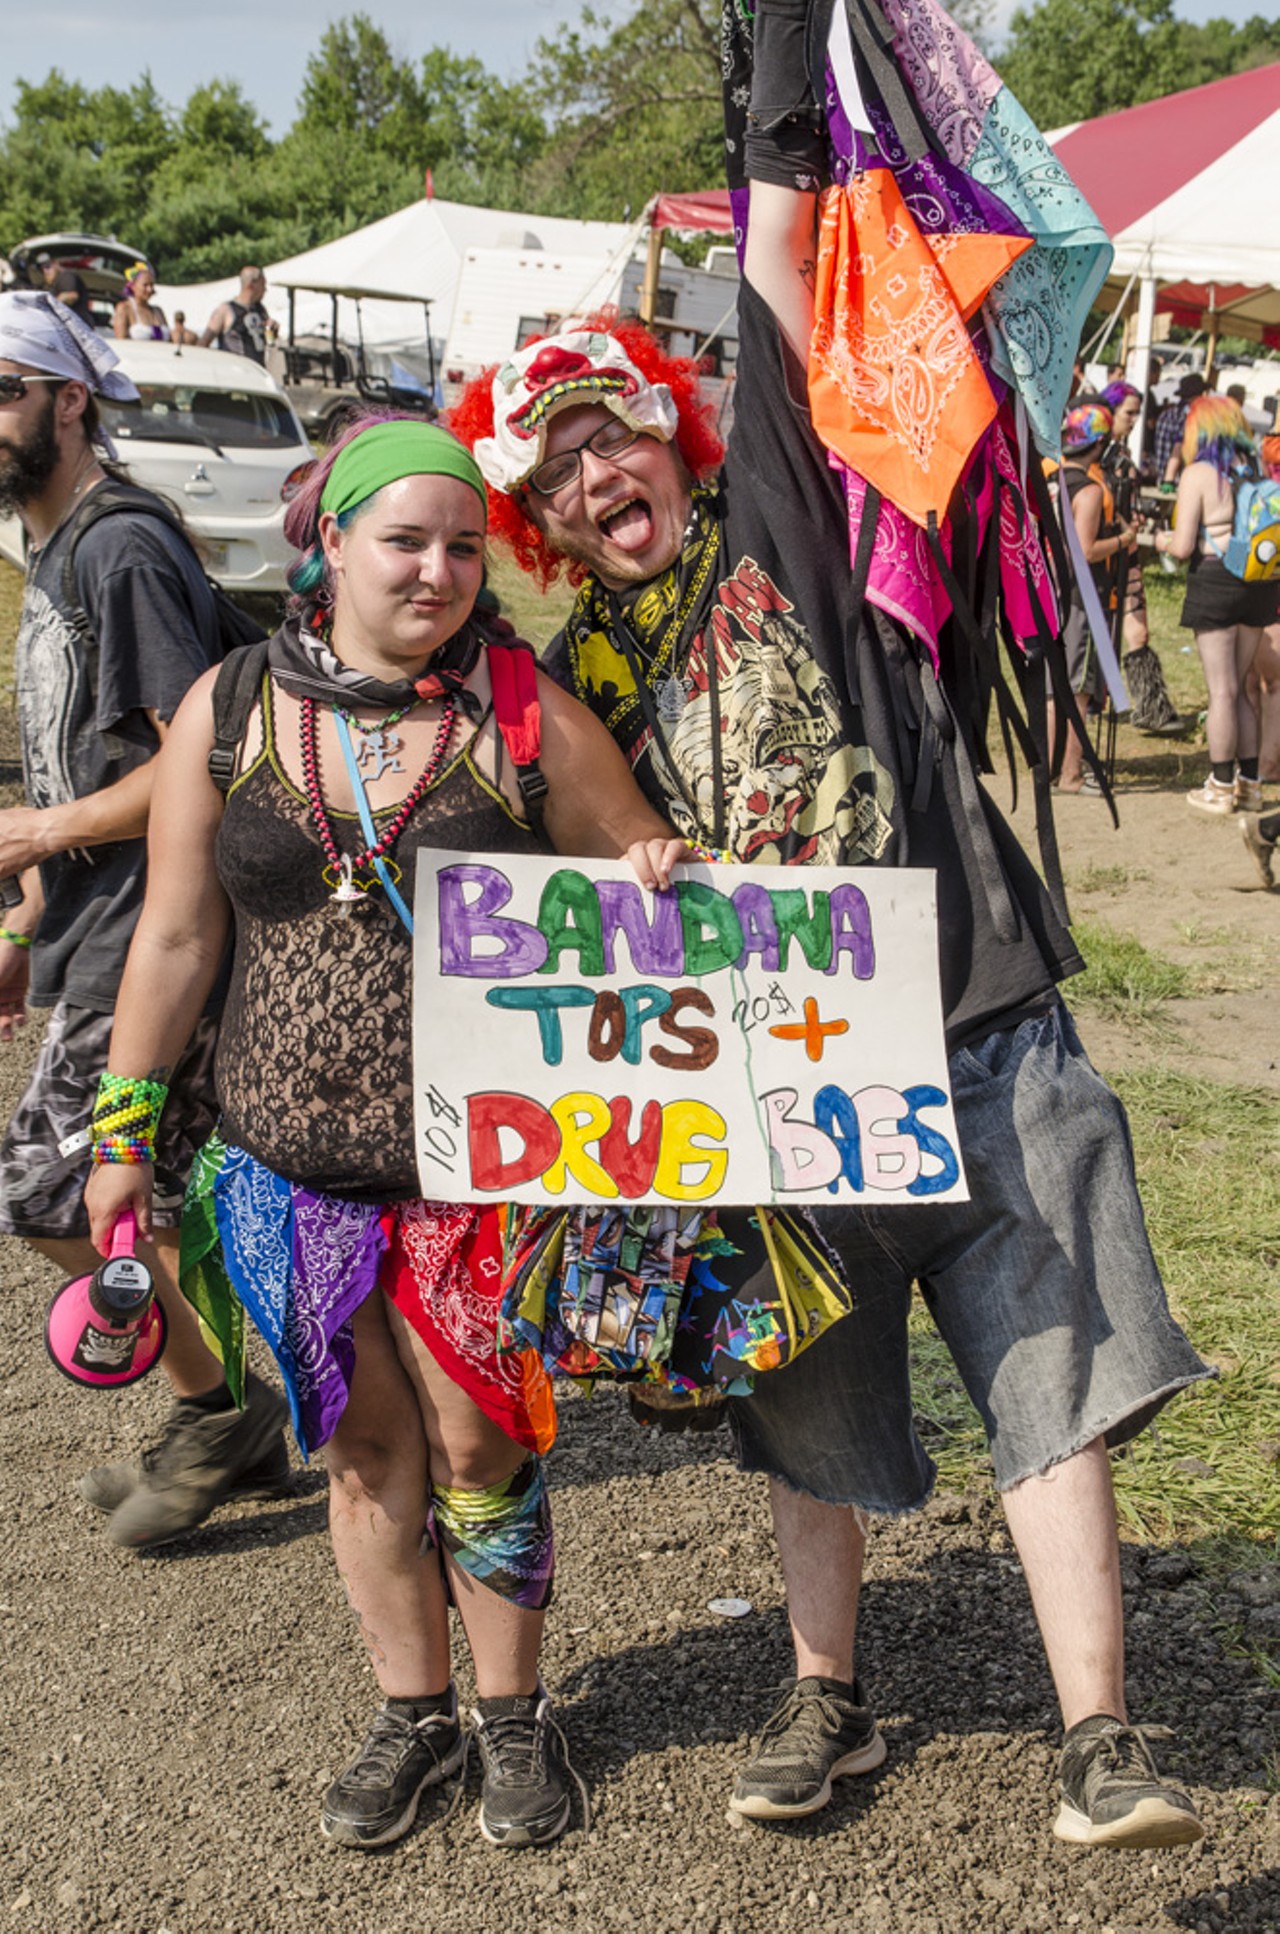 Photos: The 2016 Gathering of the Juggalos Was Everything You Imagined It Would Be